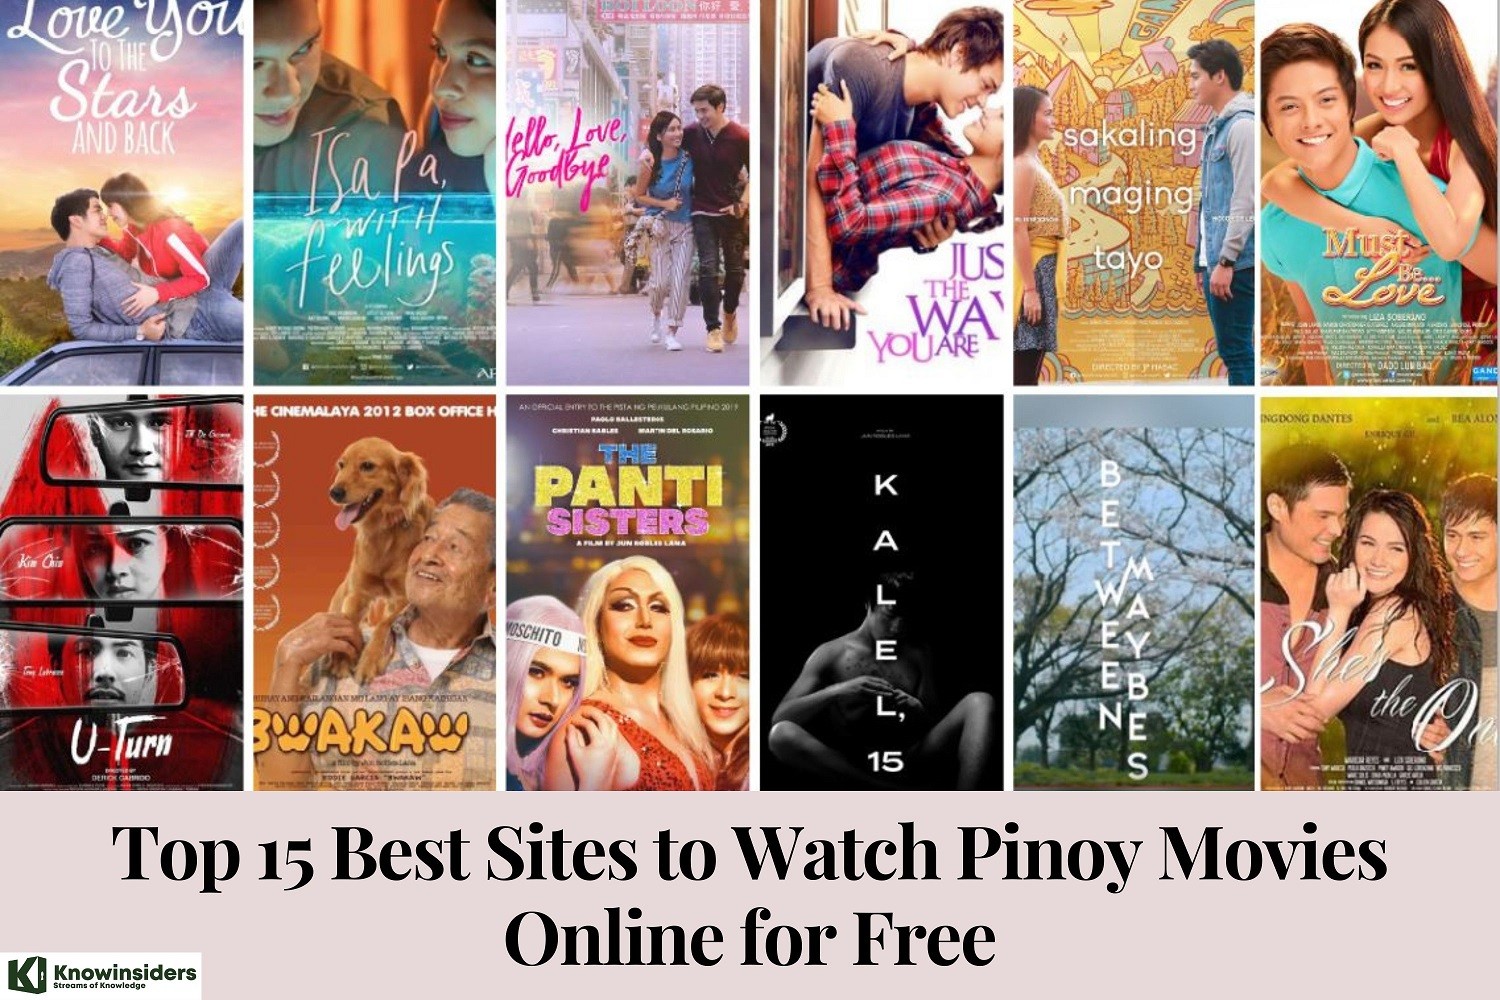 Top 15 Legal Sites to Watch Pinoy Movies Online for Free